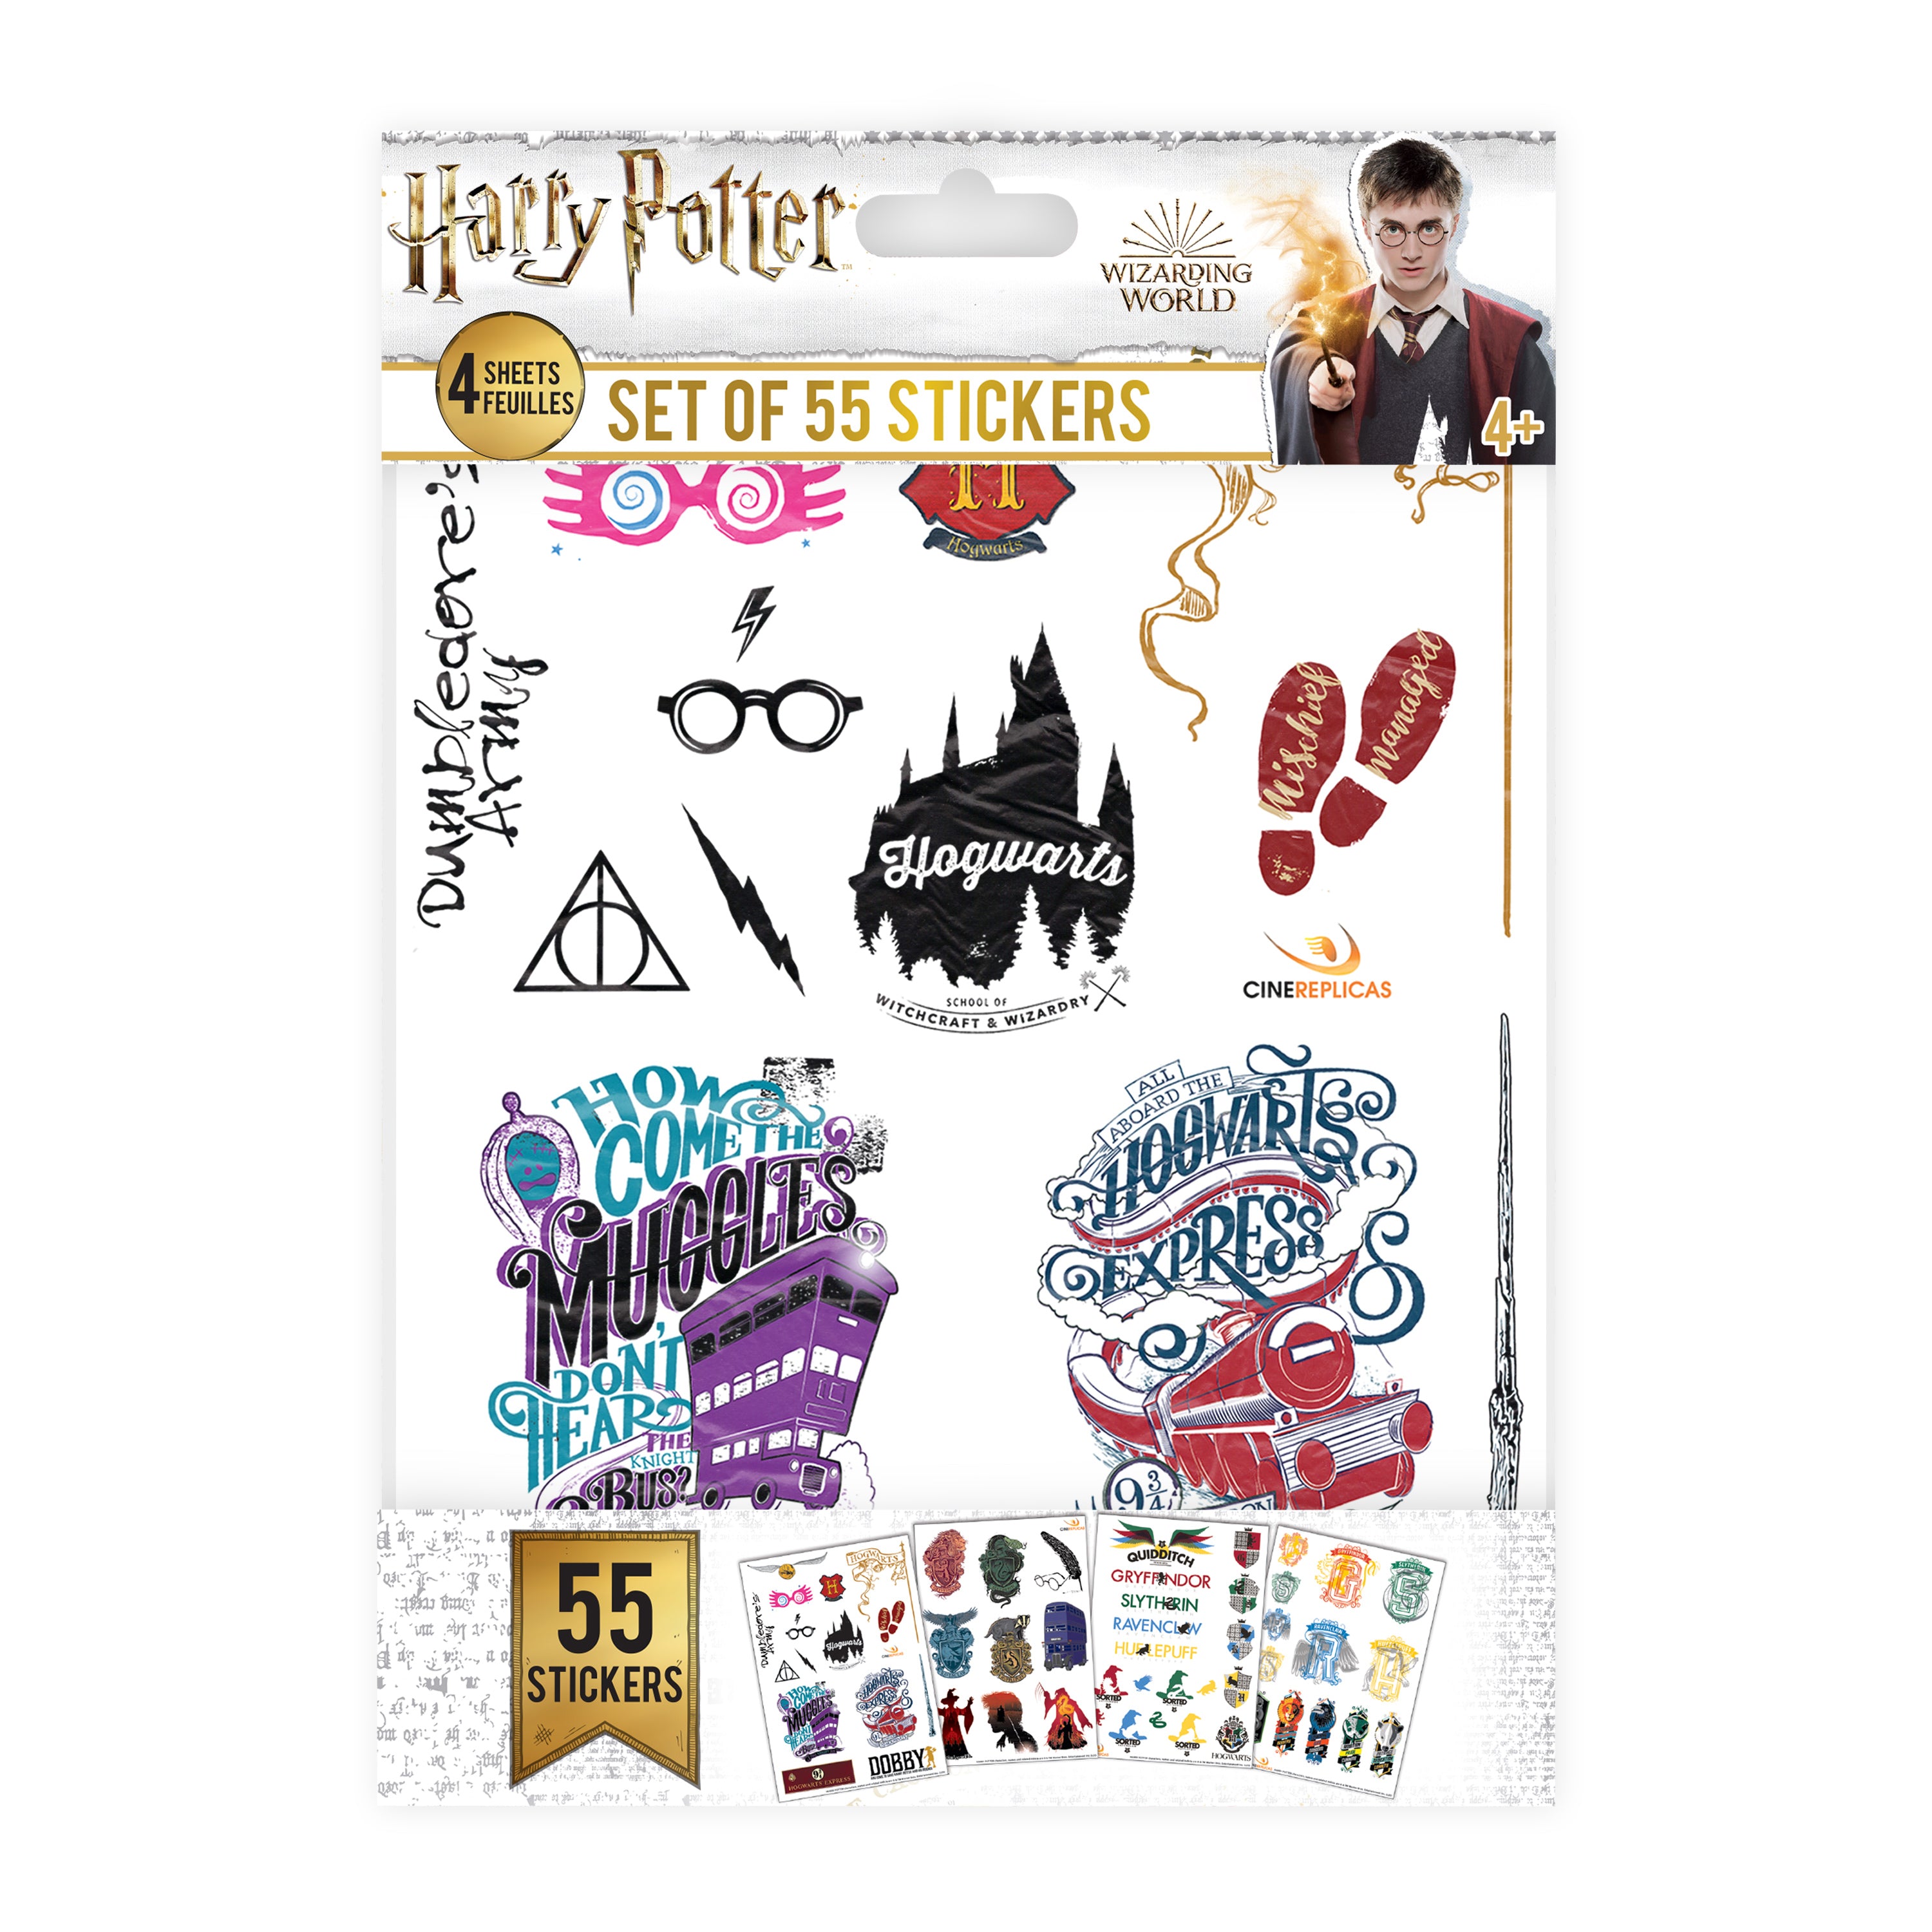 Harry Potter Stickers Party Favors Bundle ~ Over 575 Harry Potter Stickers Featuring Harry, Ron, Hermione and More (Harry Potter Party Supplies)